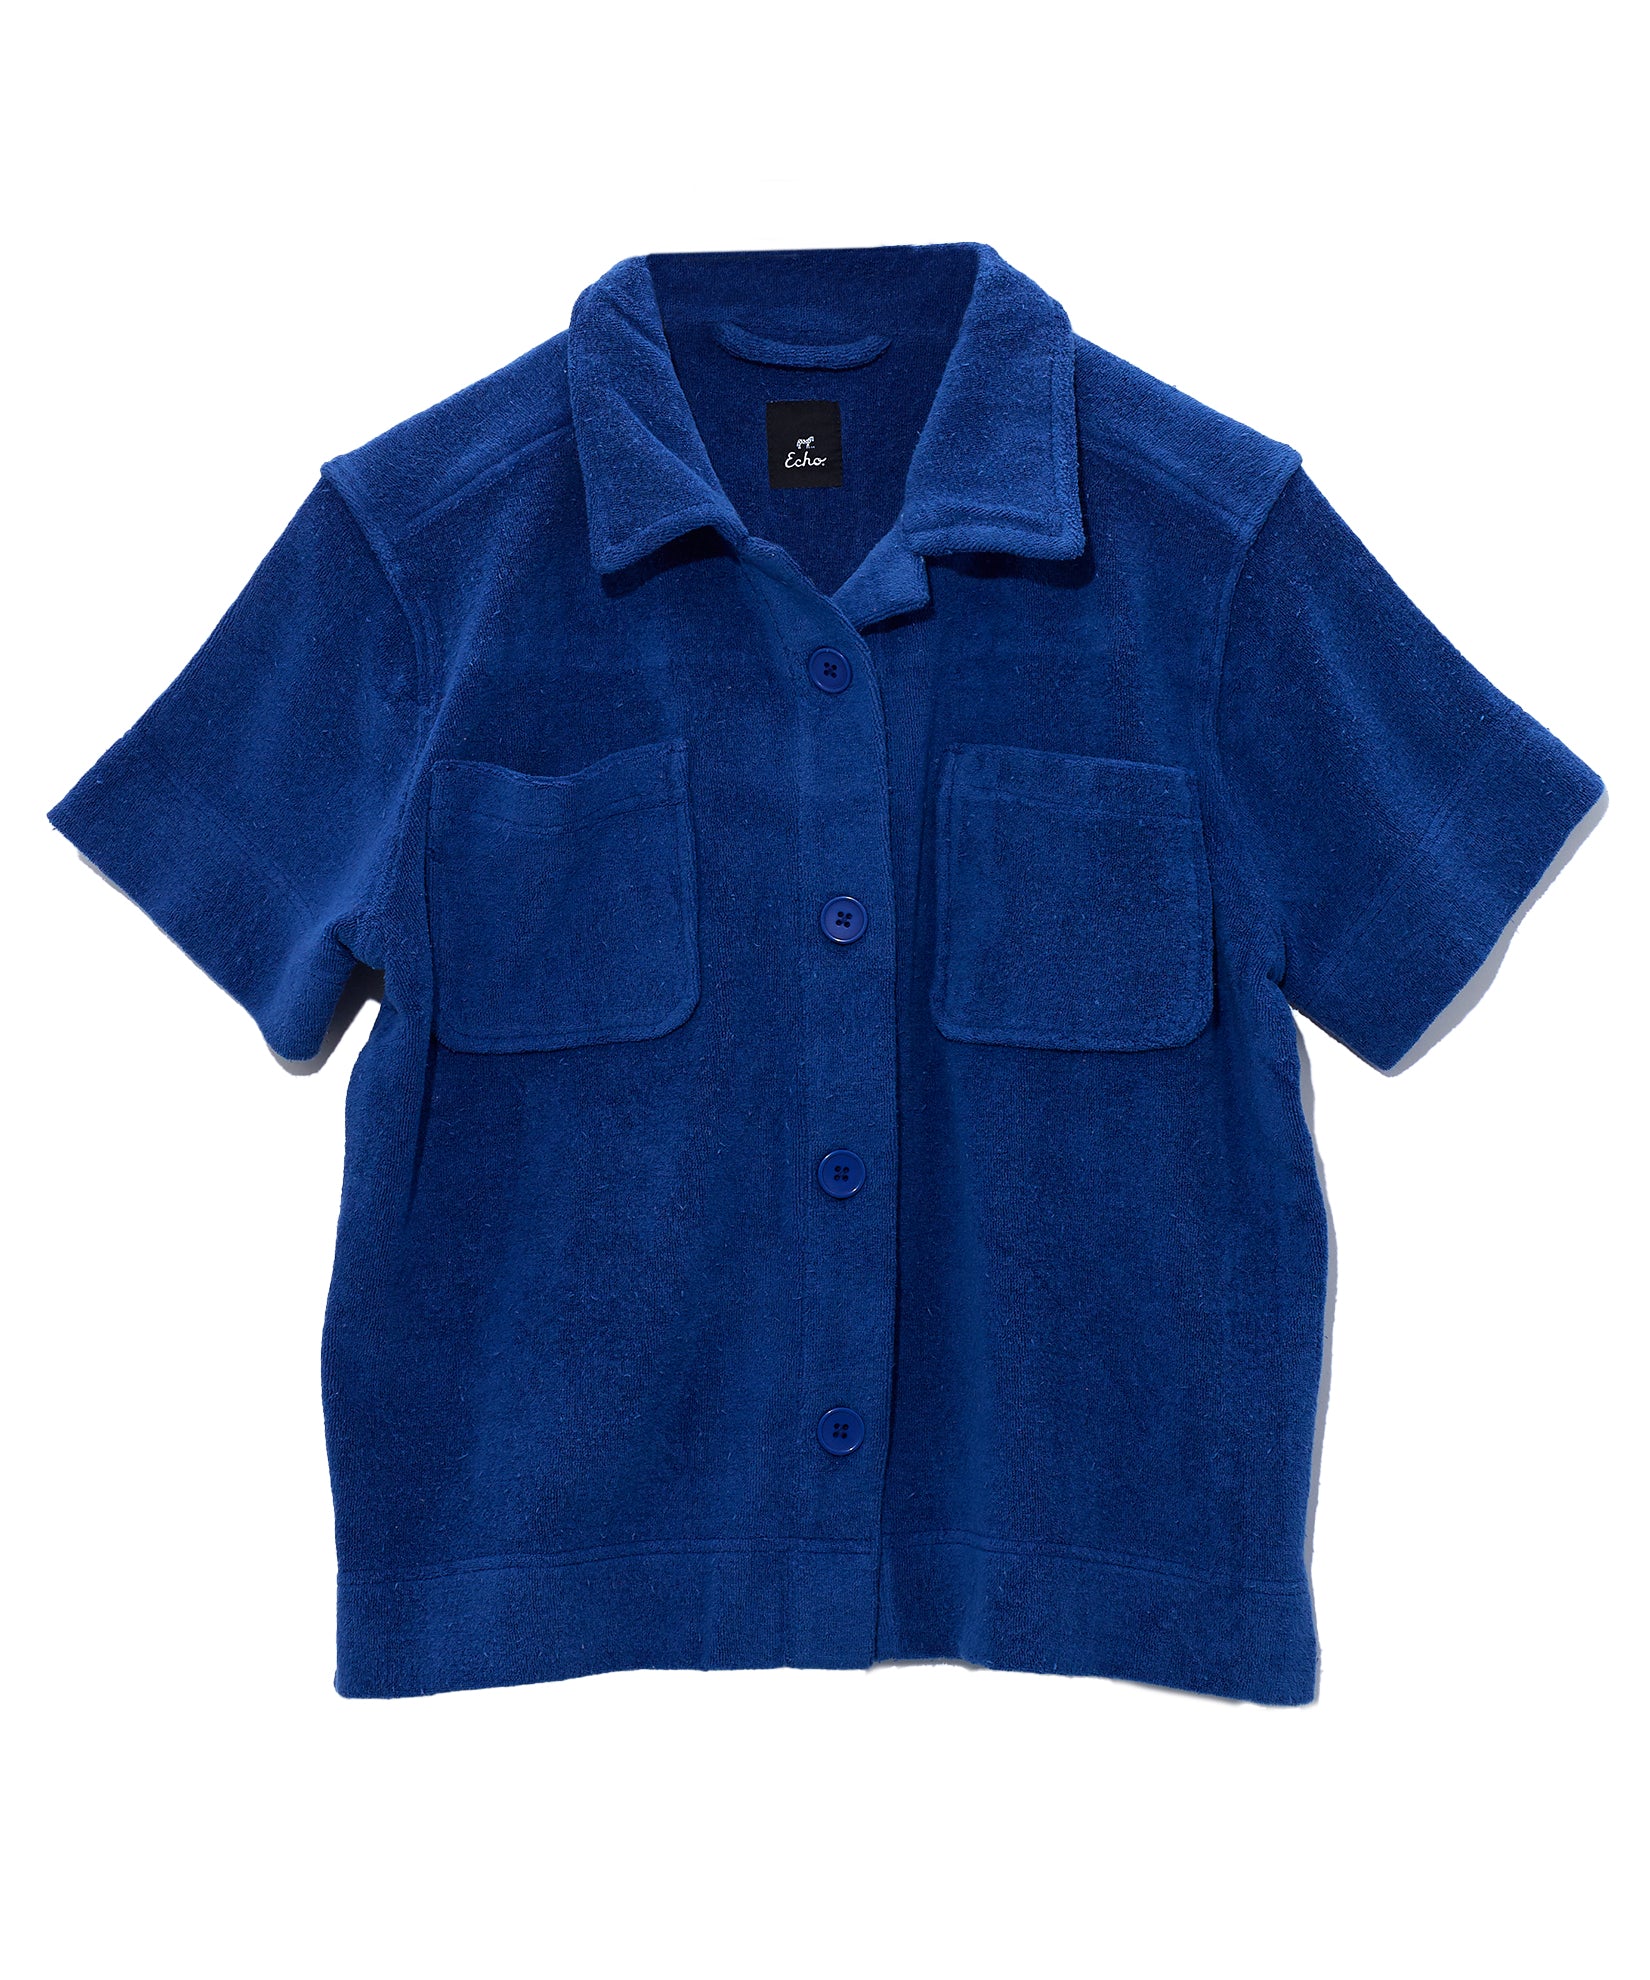 Terry Camp Shirt in color Maritime Navy